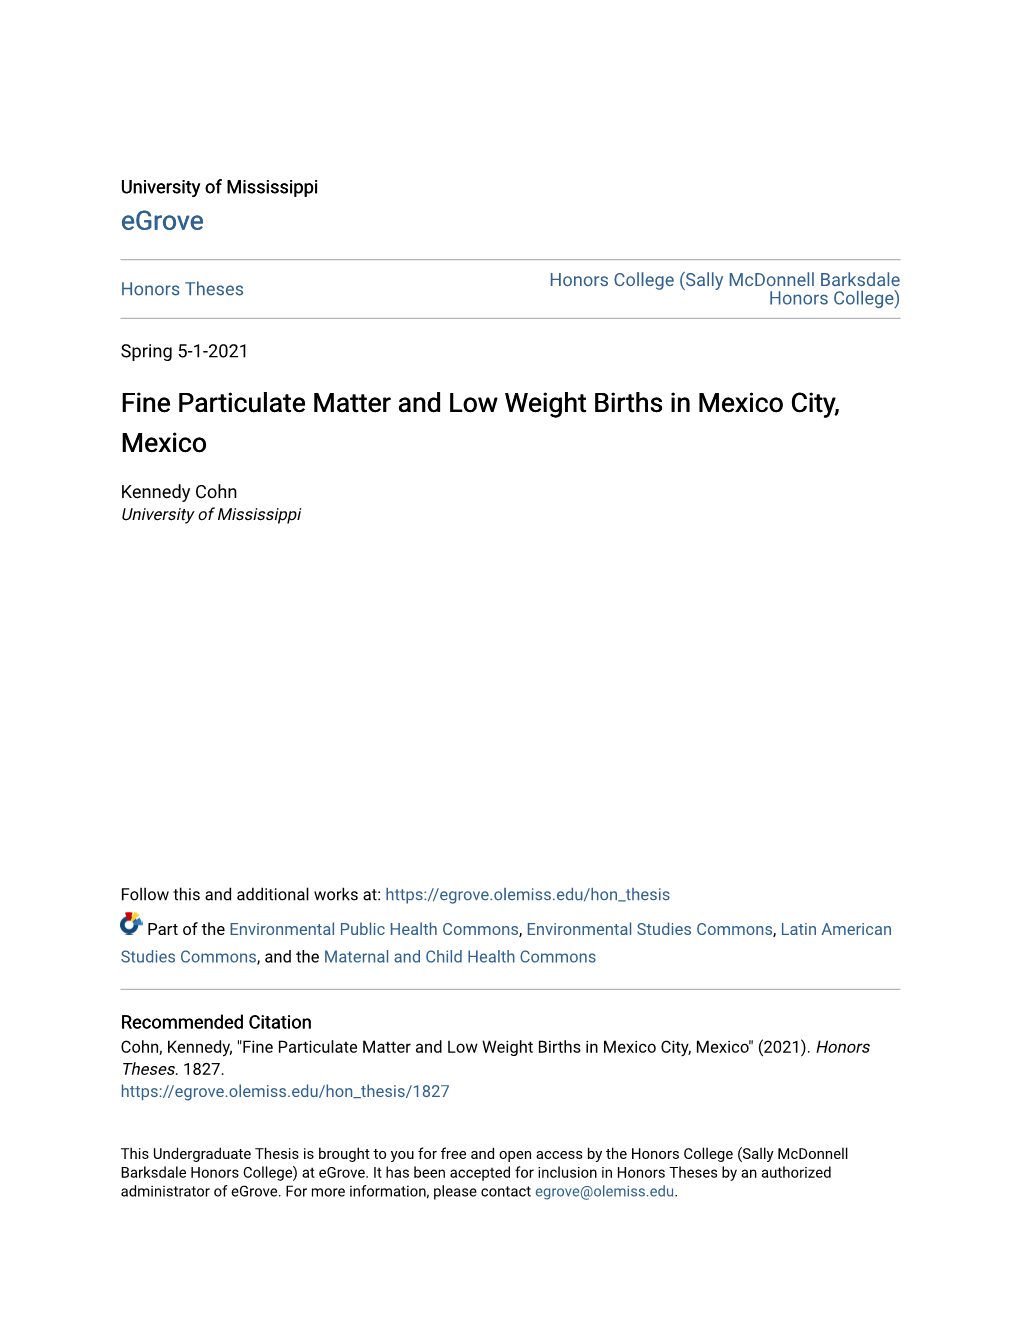 Fine Particulate Matter and Low Weight Births in Mexico City, Mexico